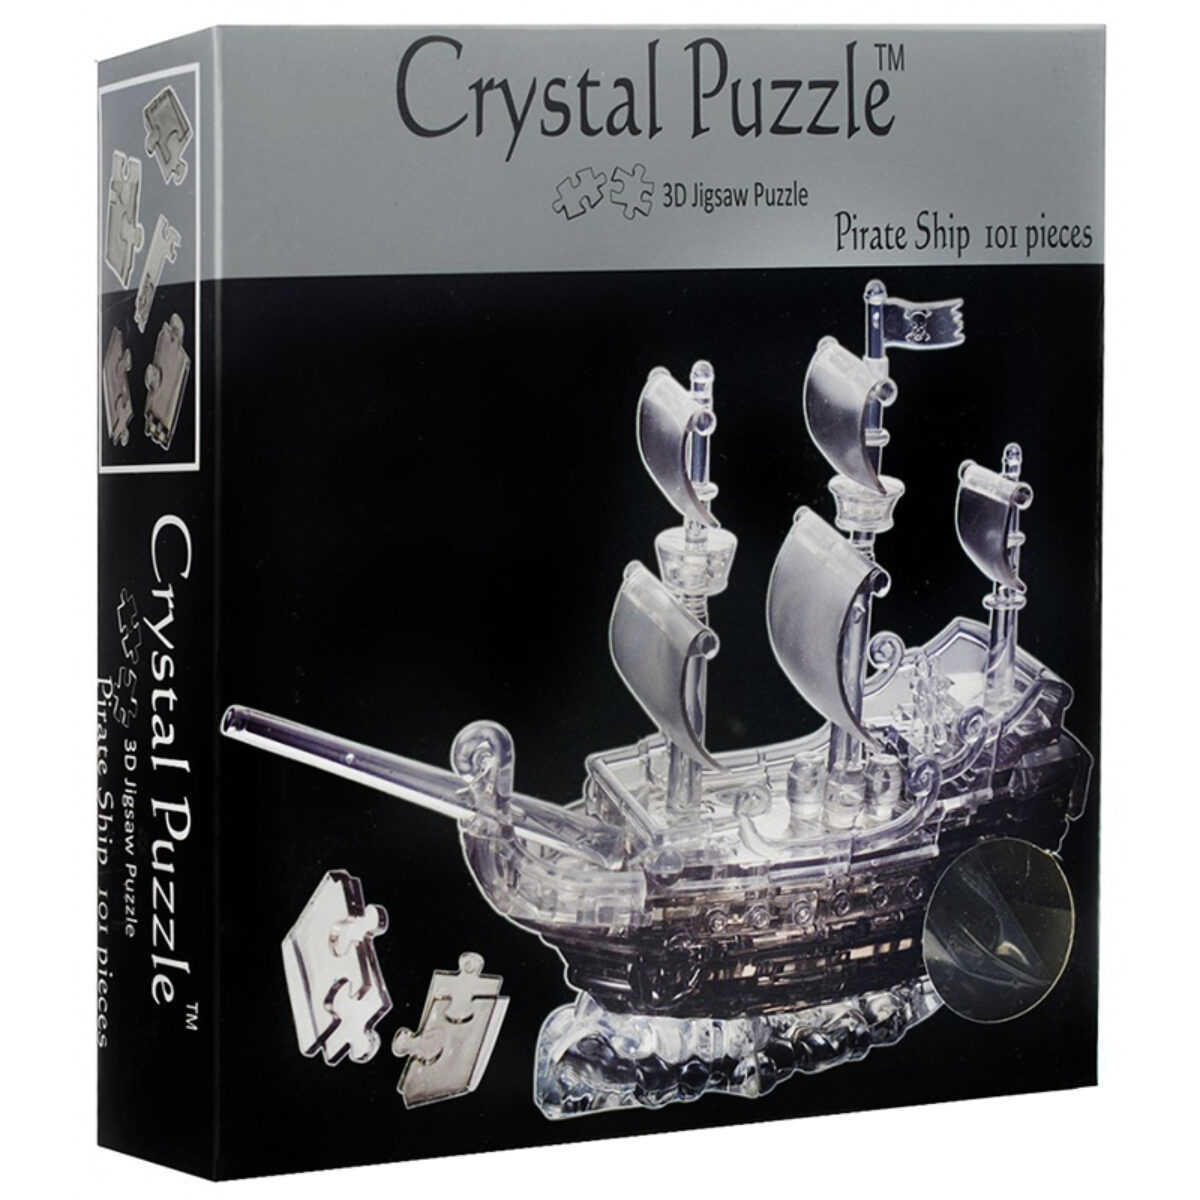 3D Deluxe Pirate Ship Crystal Puzzle | Curiouskidzz